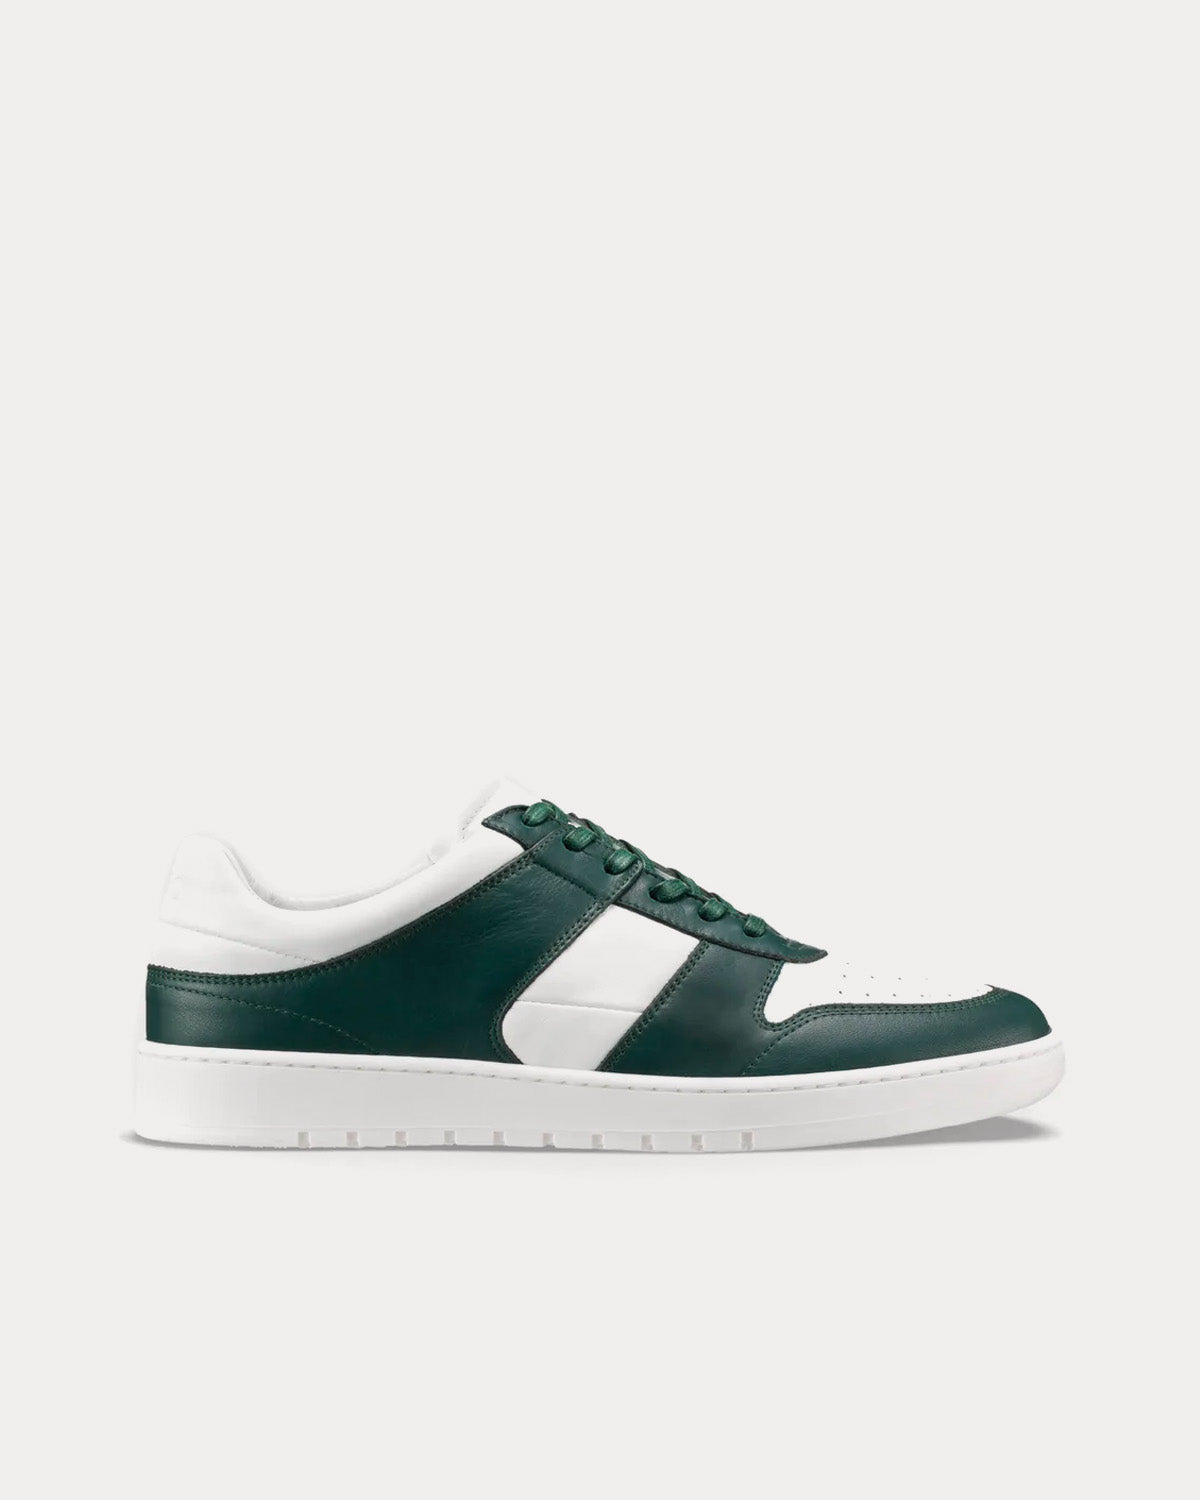 Koio - Aventino Ivy Low Top Sneakers